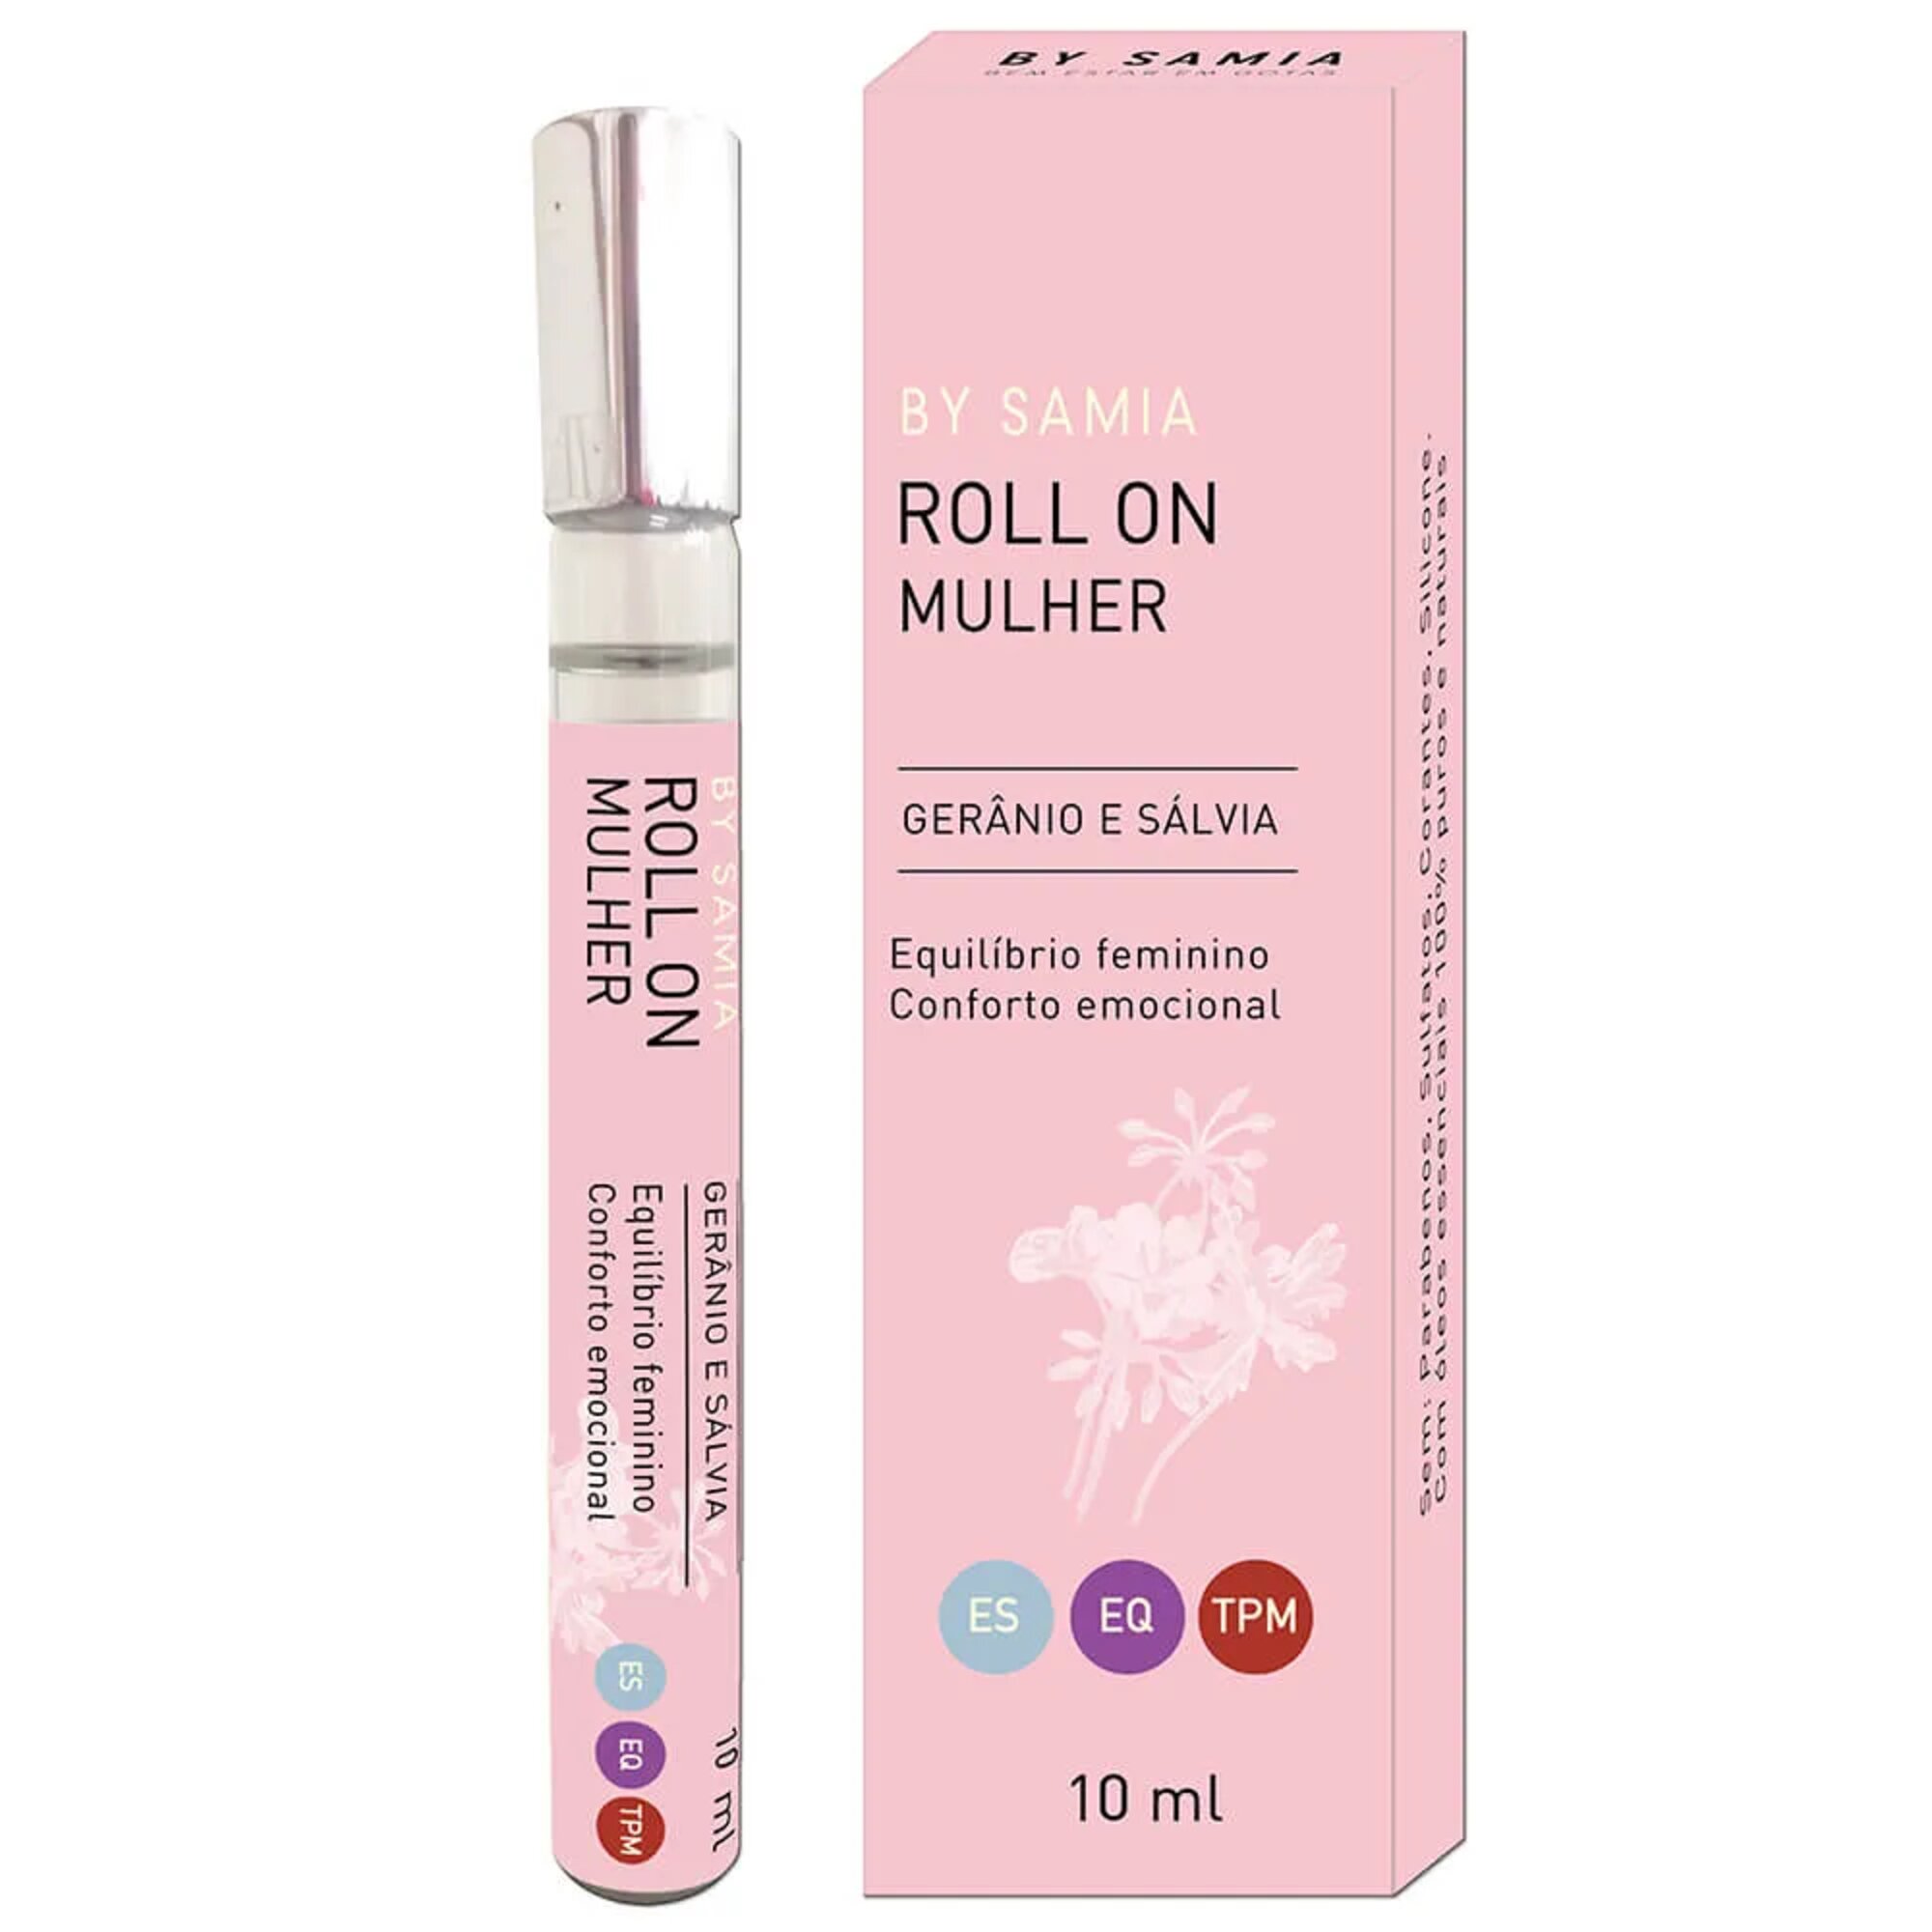 Roll On Mulher 10mL By Samia